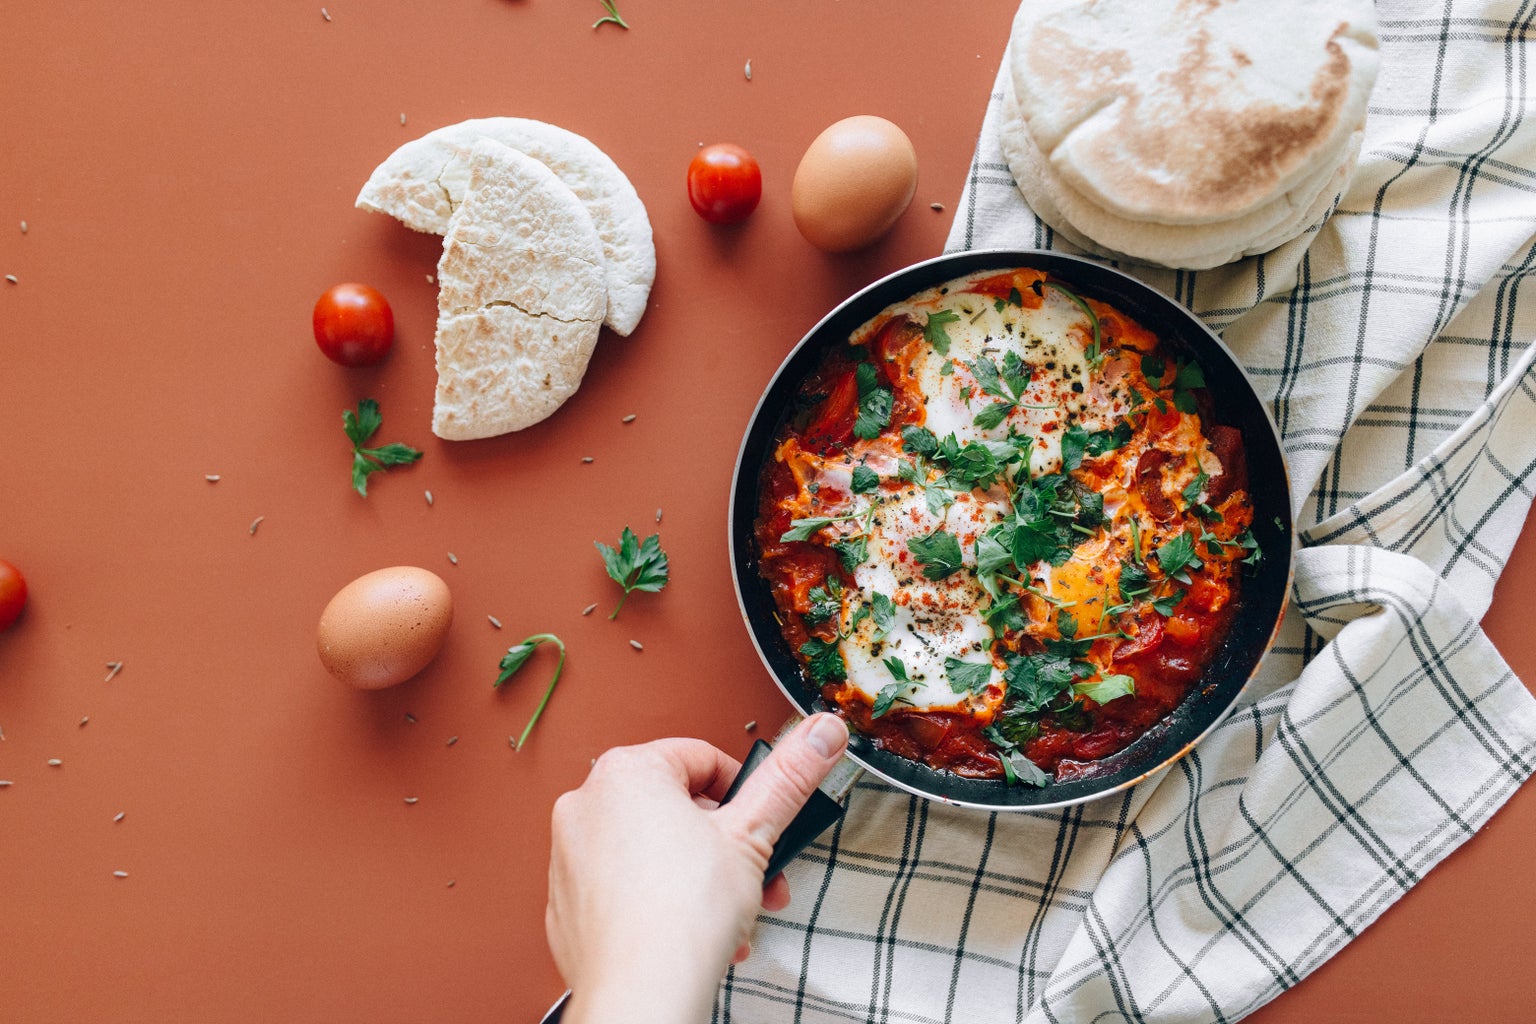 Shakshuka, a Middle Eastern dish with fried eggs, tomatoes, onions, red pepper and spices